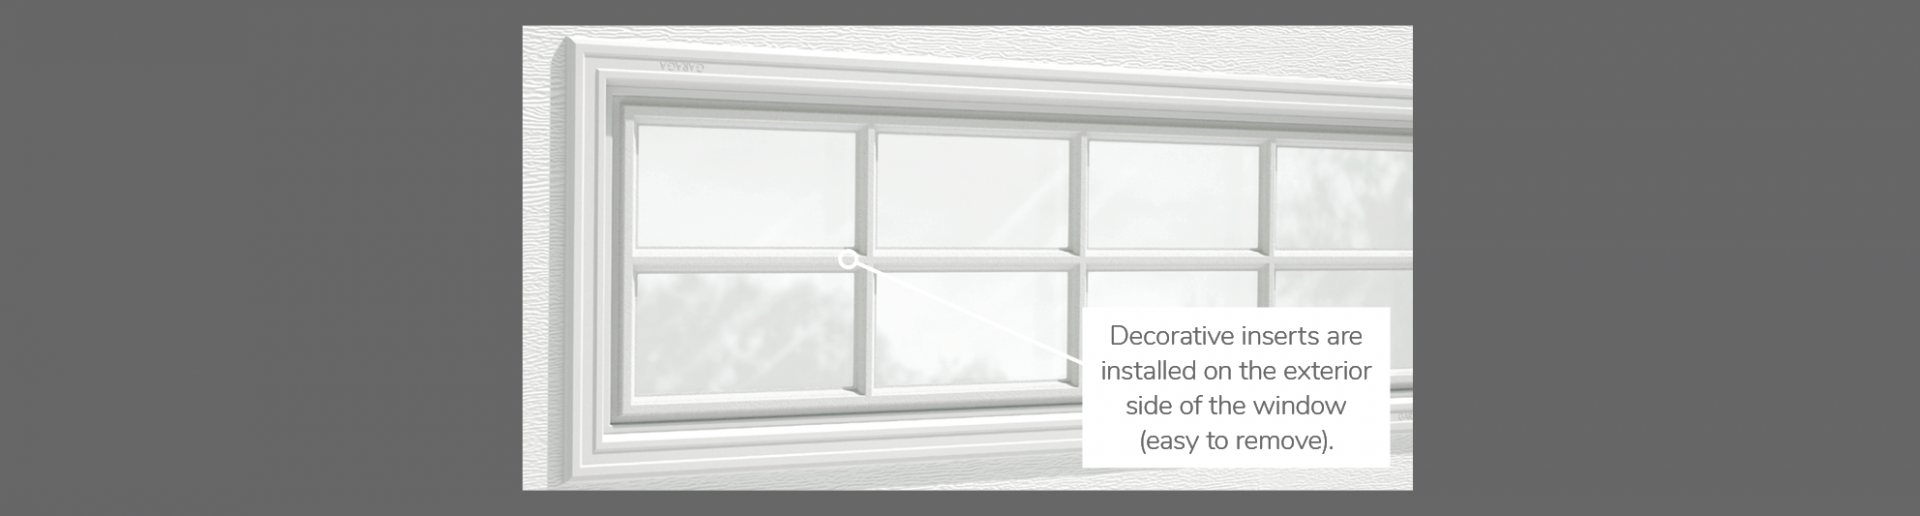 Stockton Decorative Insert, 40" x 13" or 41" x 16", available for door R-16, R-12, 3 layers - Polystyrene, 2 layers - Polystyrene and Non-insulated